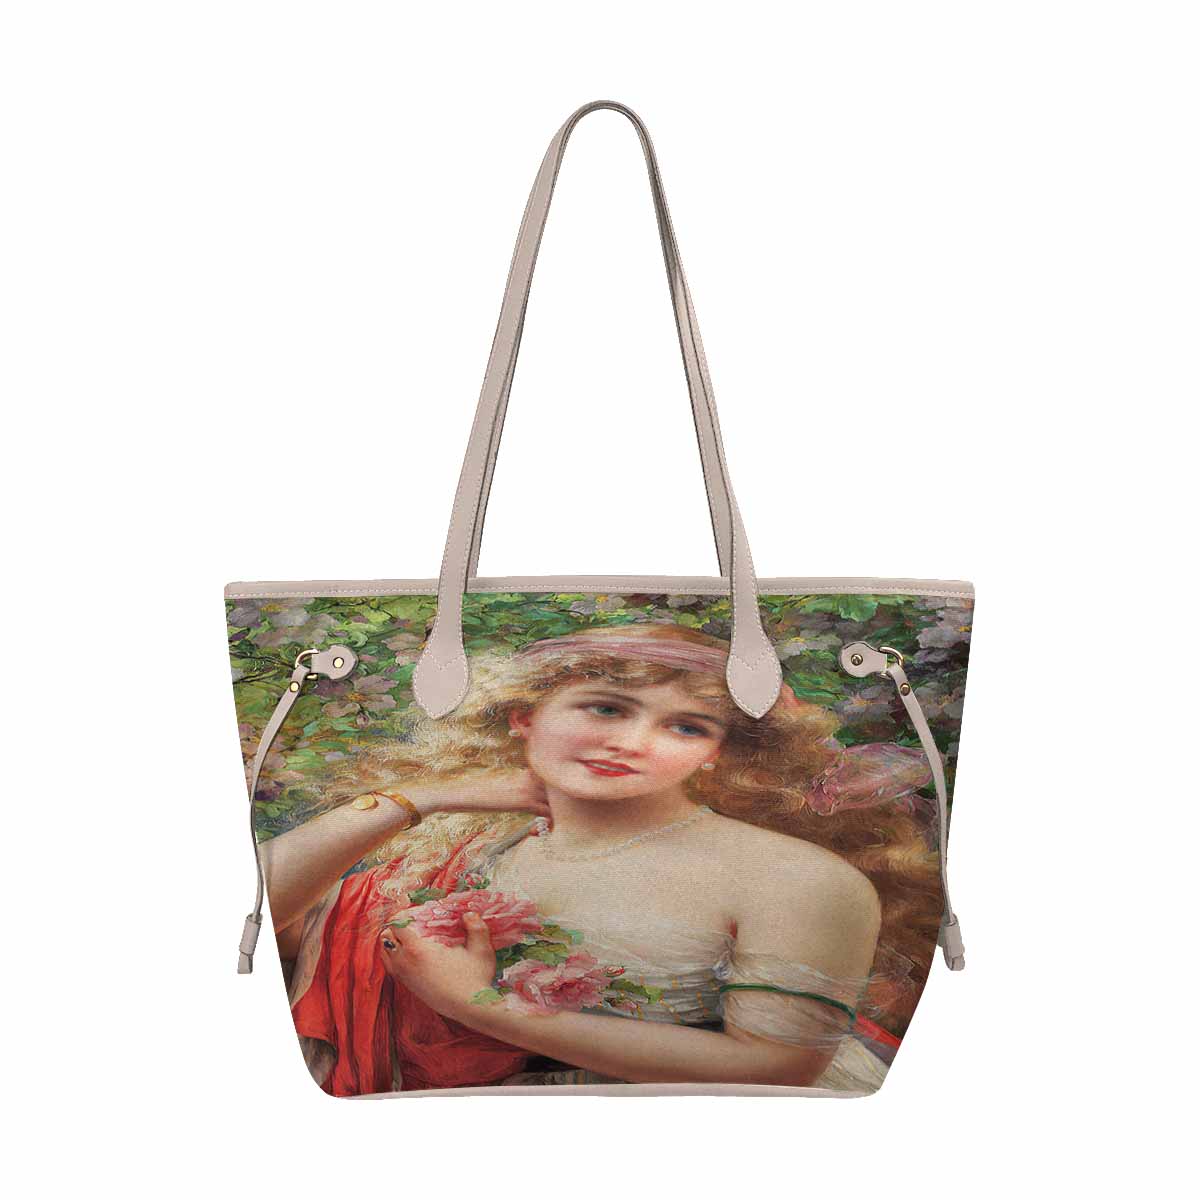 Victorian Lady Design Handbag, Model 1695361, Young Lady With Roses, BEIGE/TAN TRIM